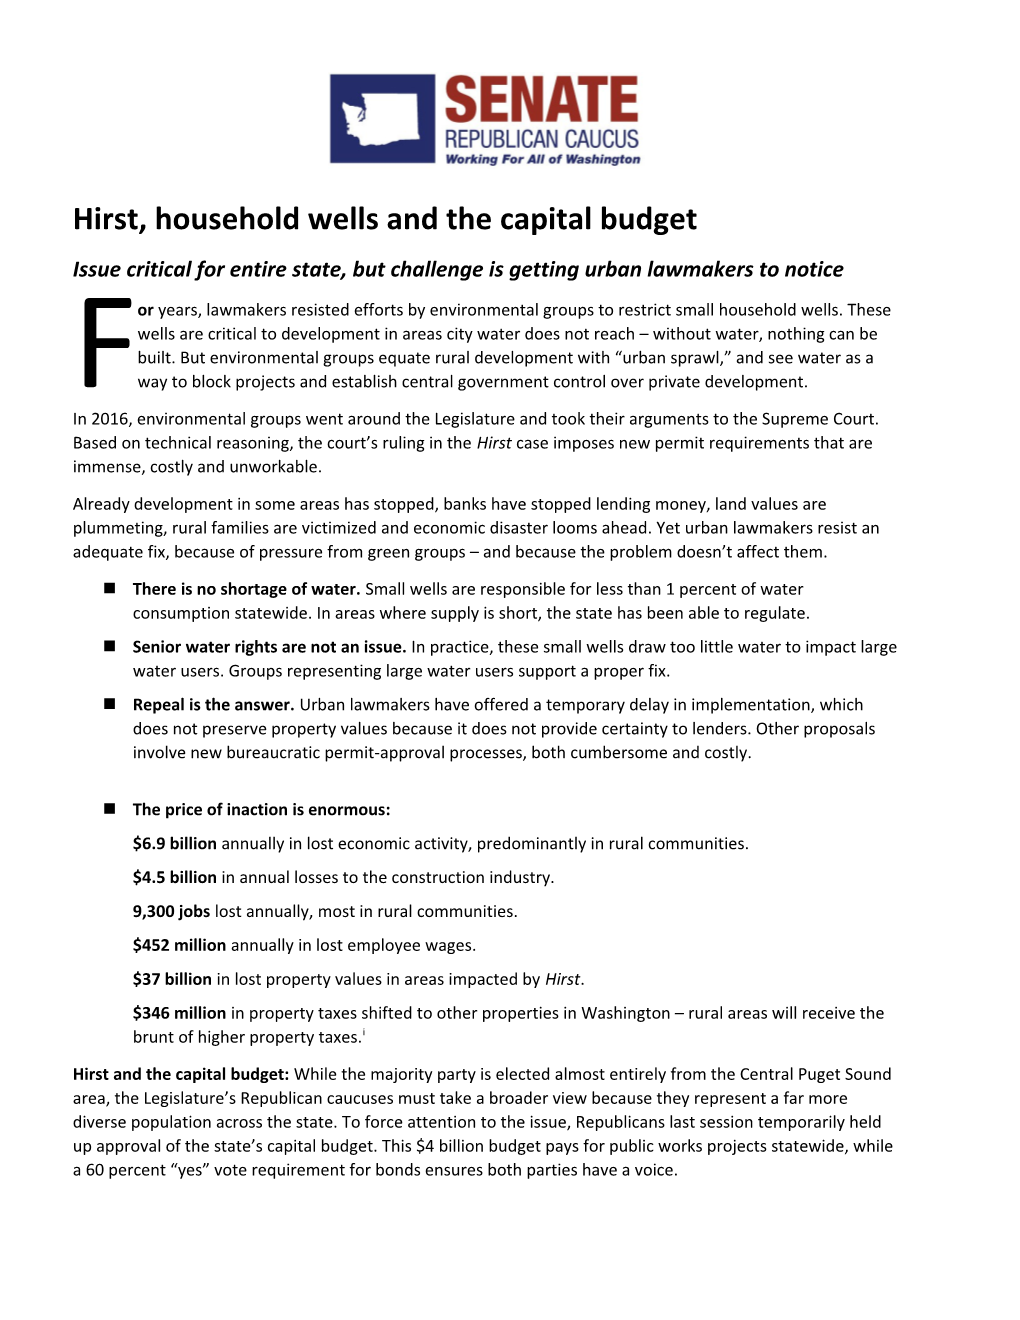 Hirst, Household Wells and the Capital Budget